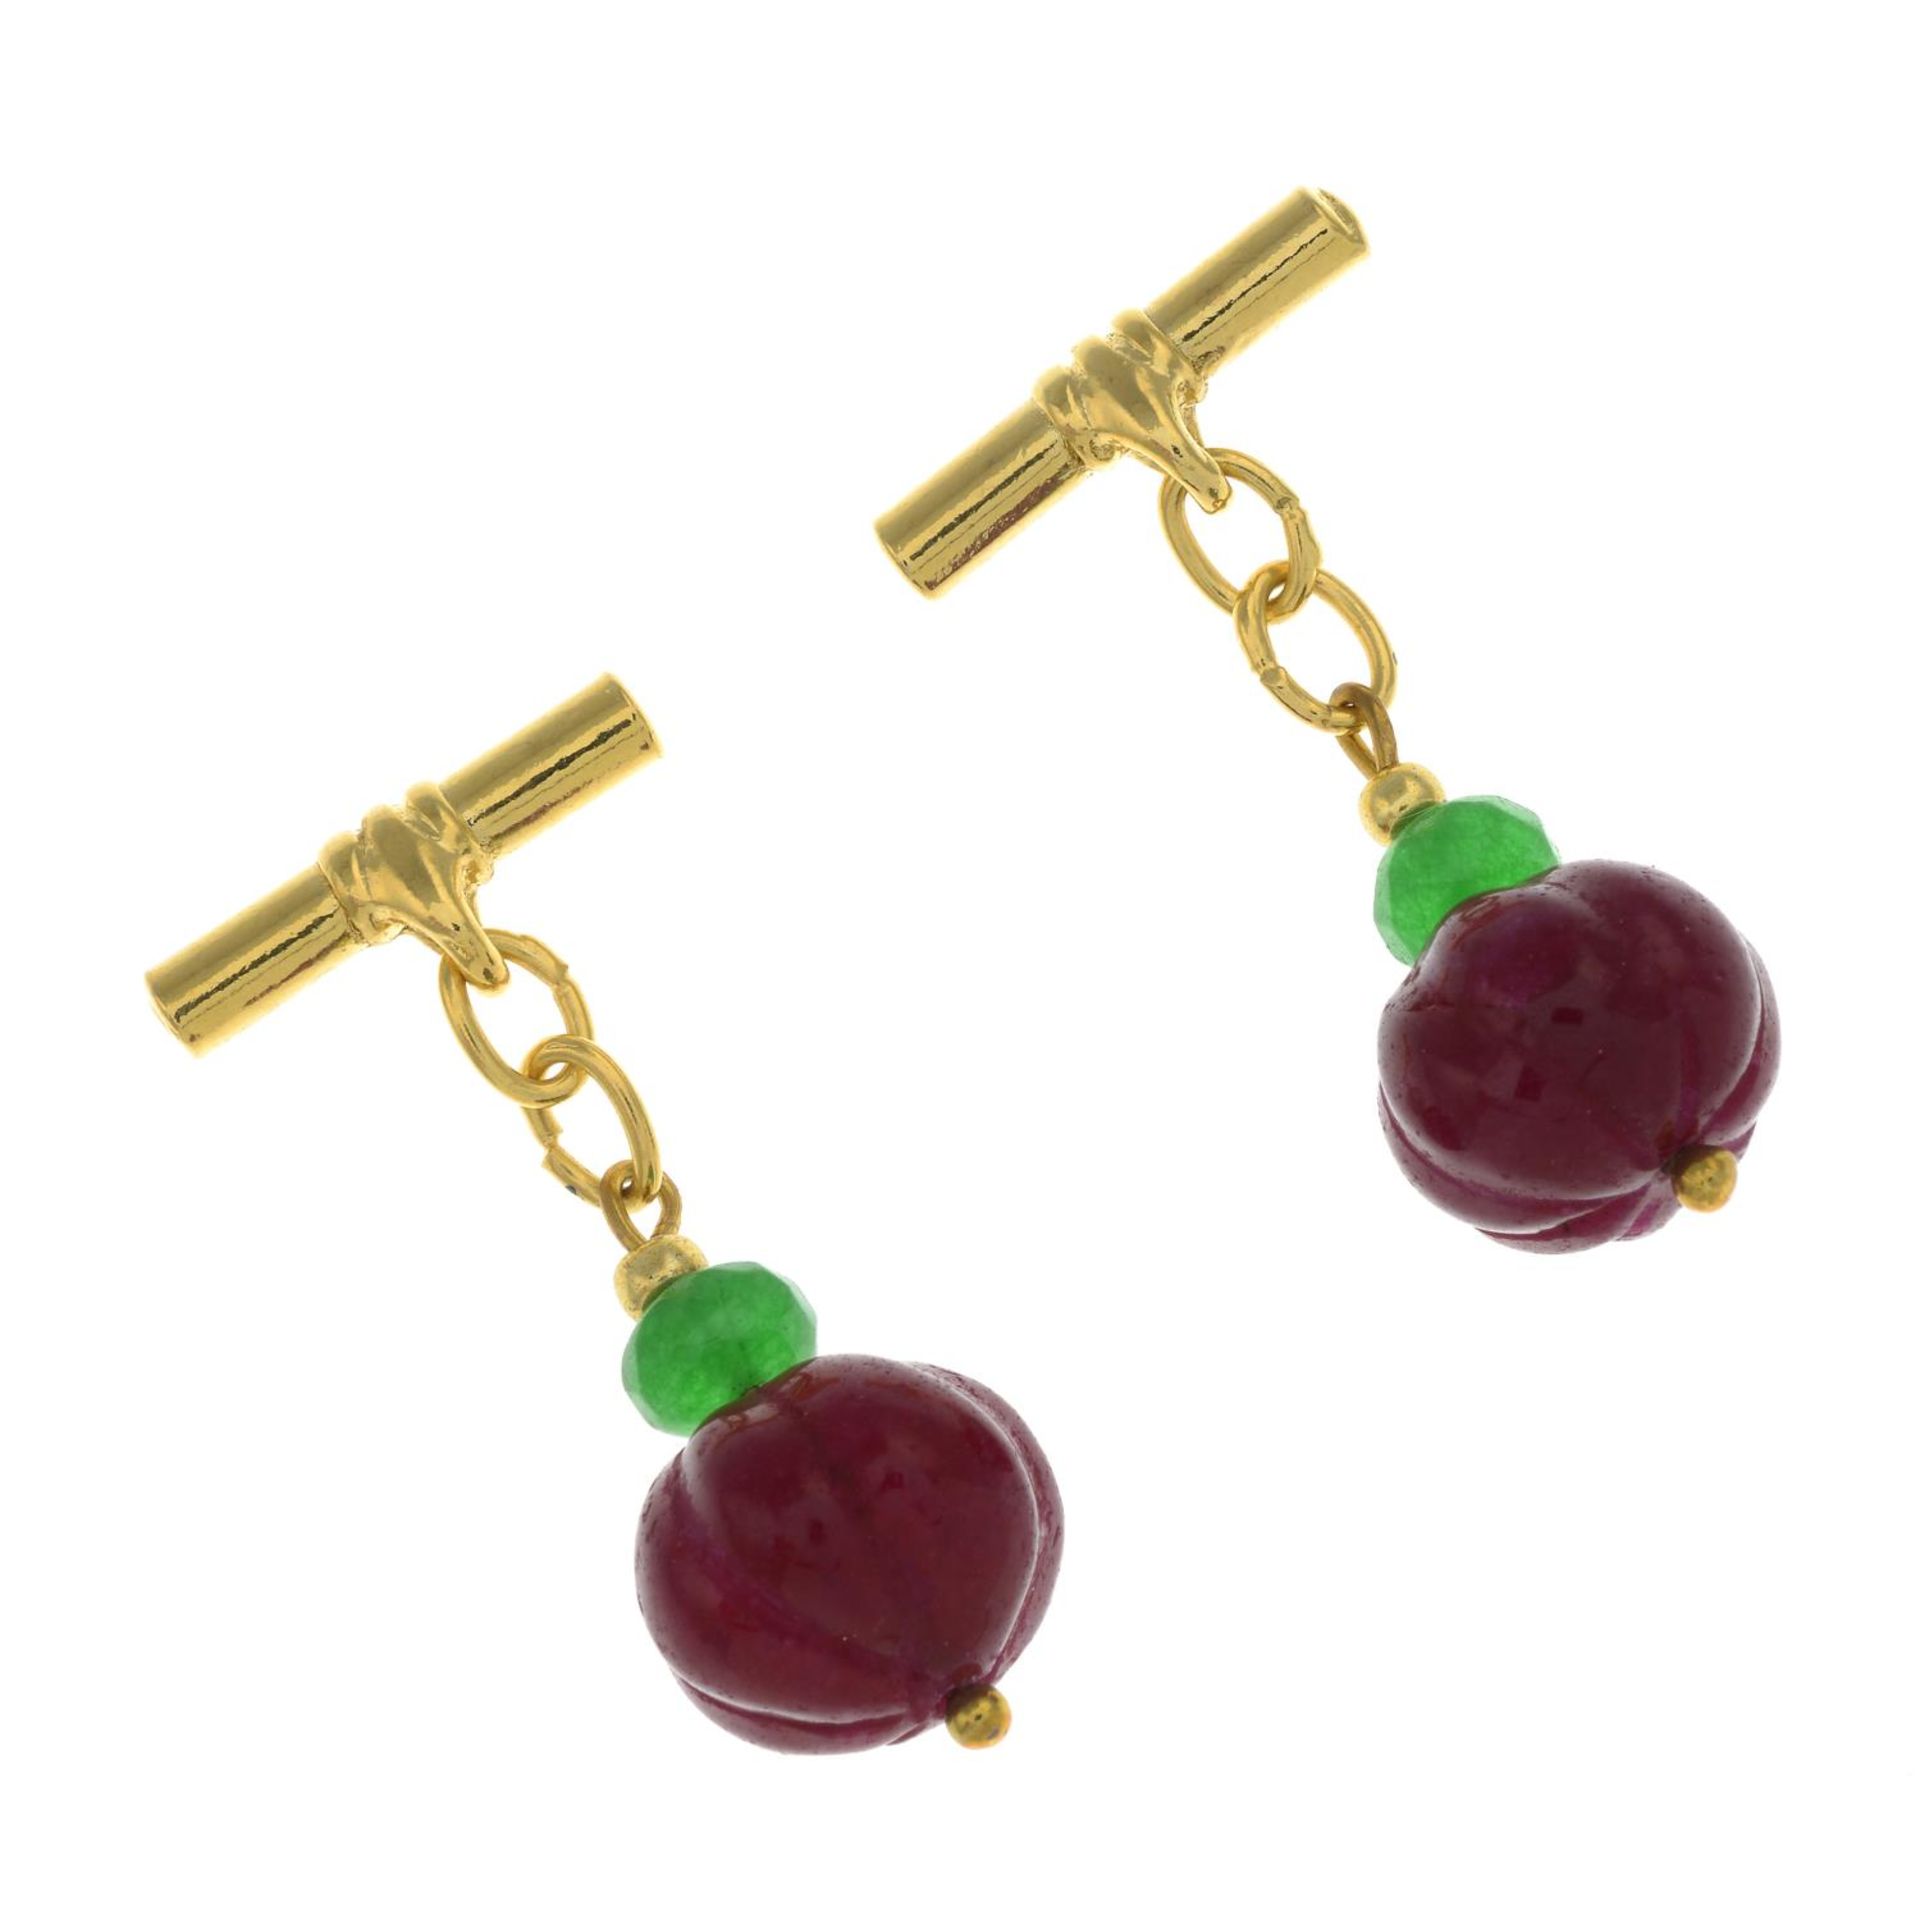 A pair of glass-filled ruby and green gem cufflinks.Length of cufflink faces 1.2 and 1.7cms.